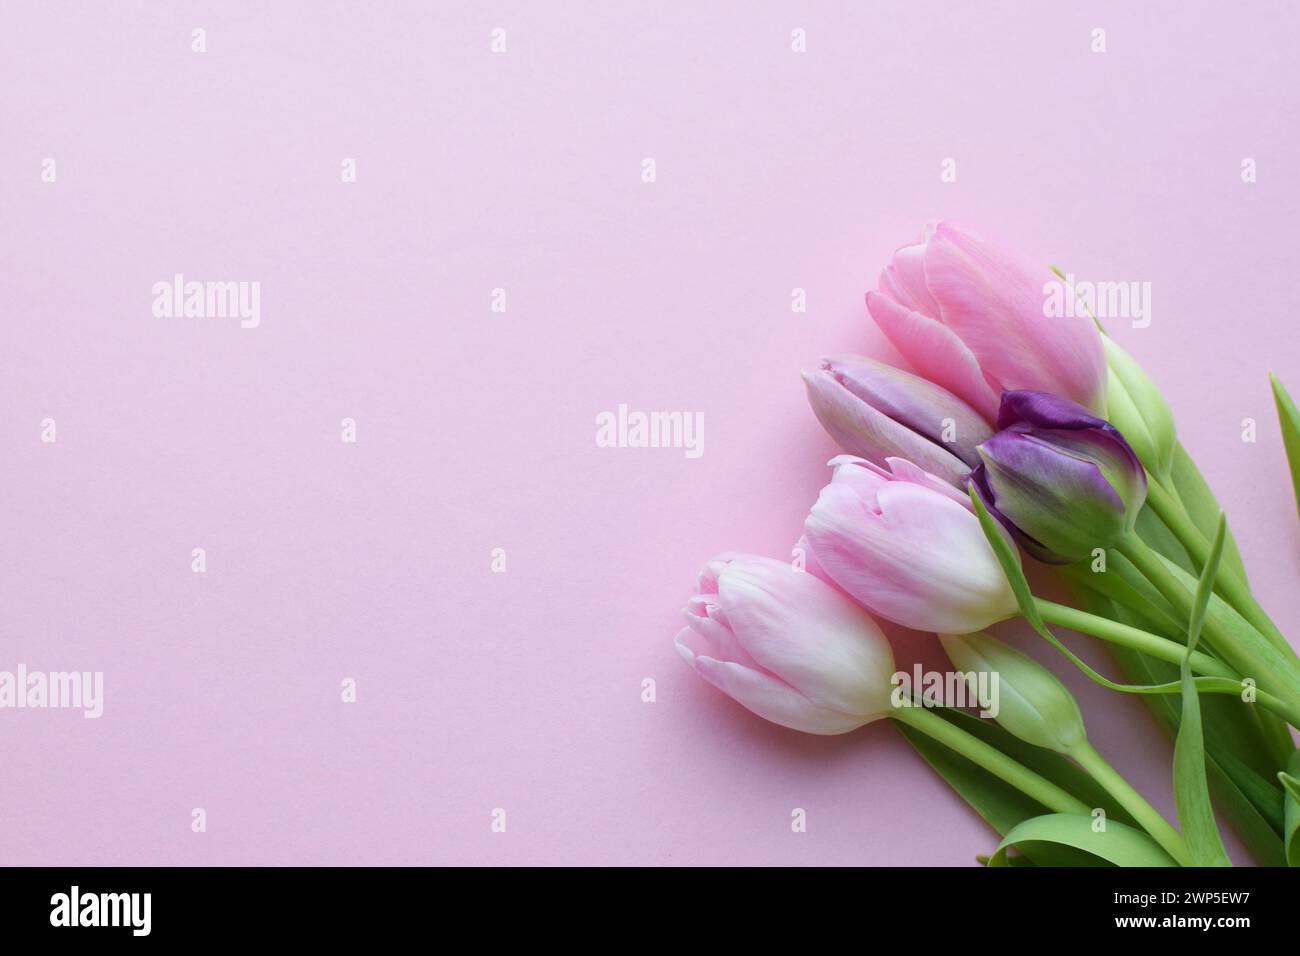 Bouquet of colorful spring tulips and place for text for Mother's Day or Women's Day on a pink background. Top view in flat style. Stock Photo